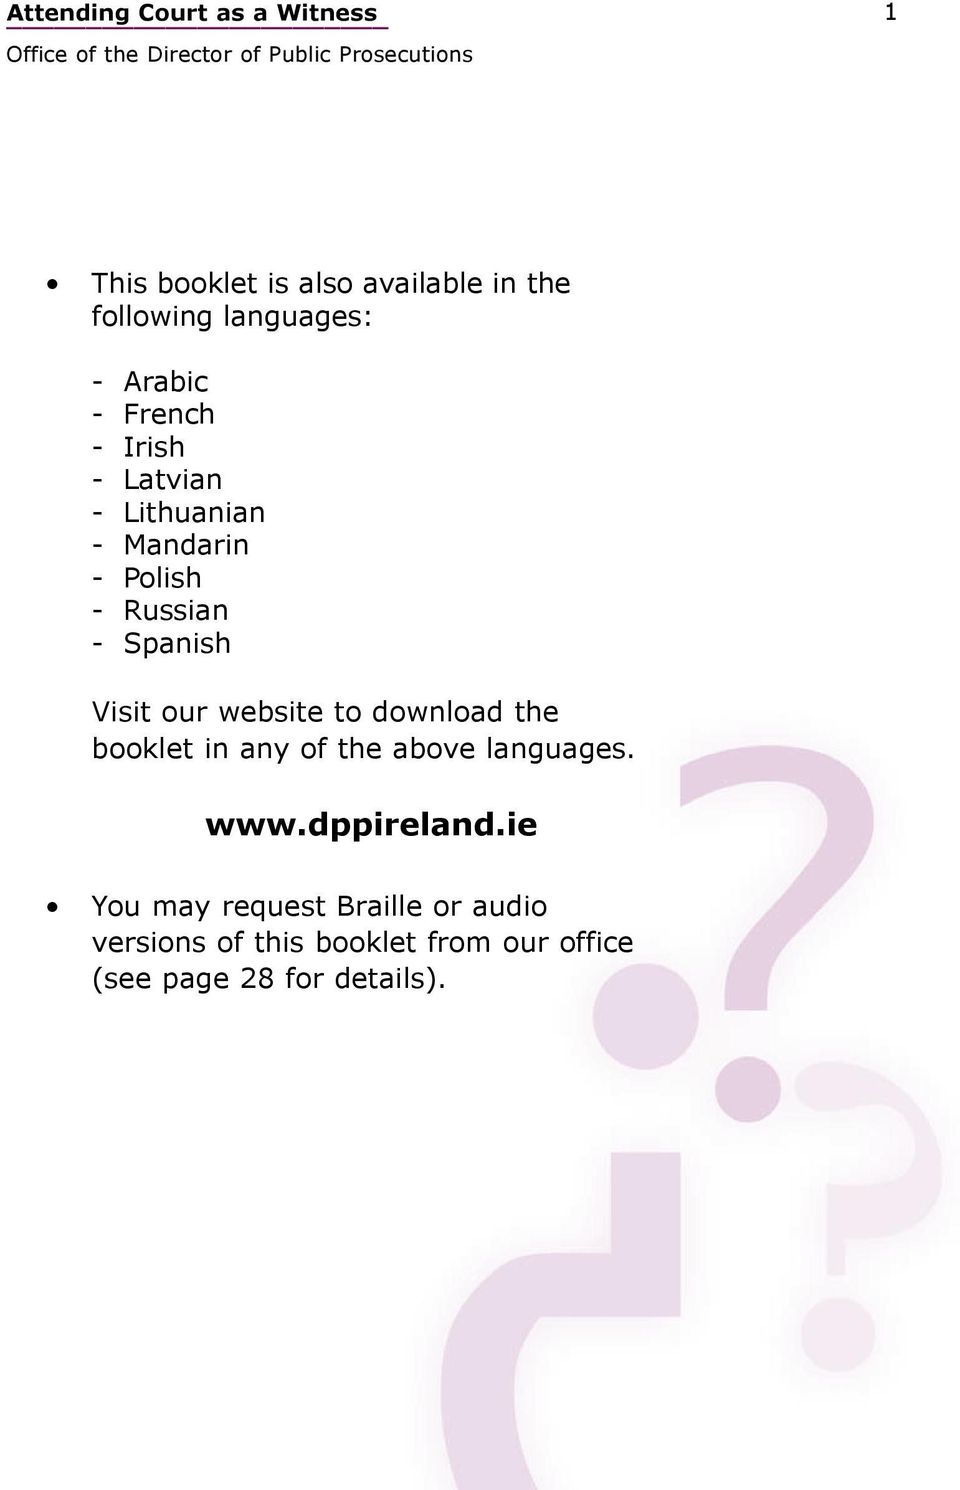 Visit our website to download the booklet in any of the above languages. www.dppireland.